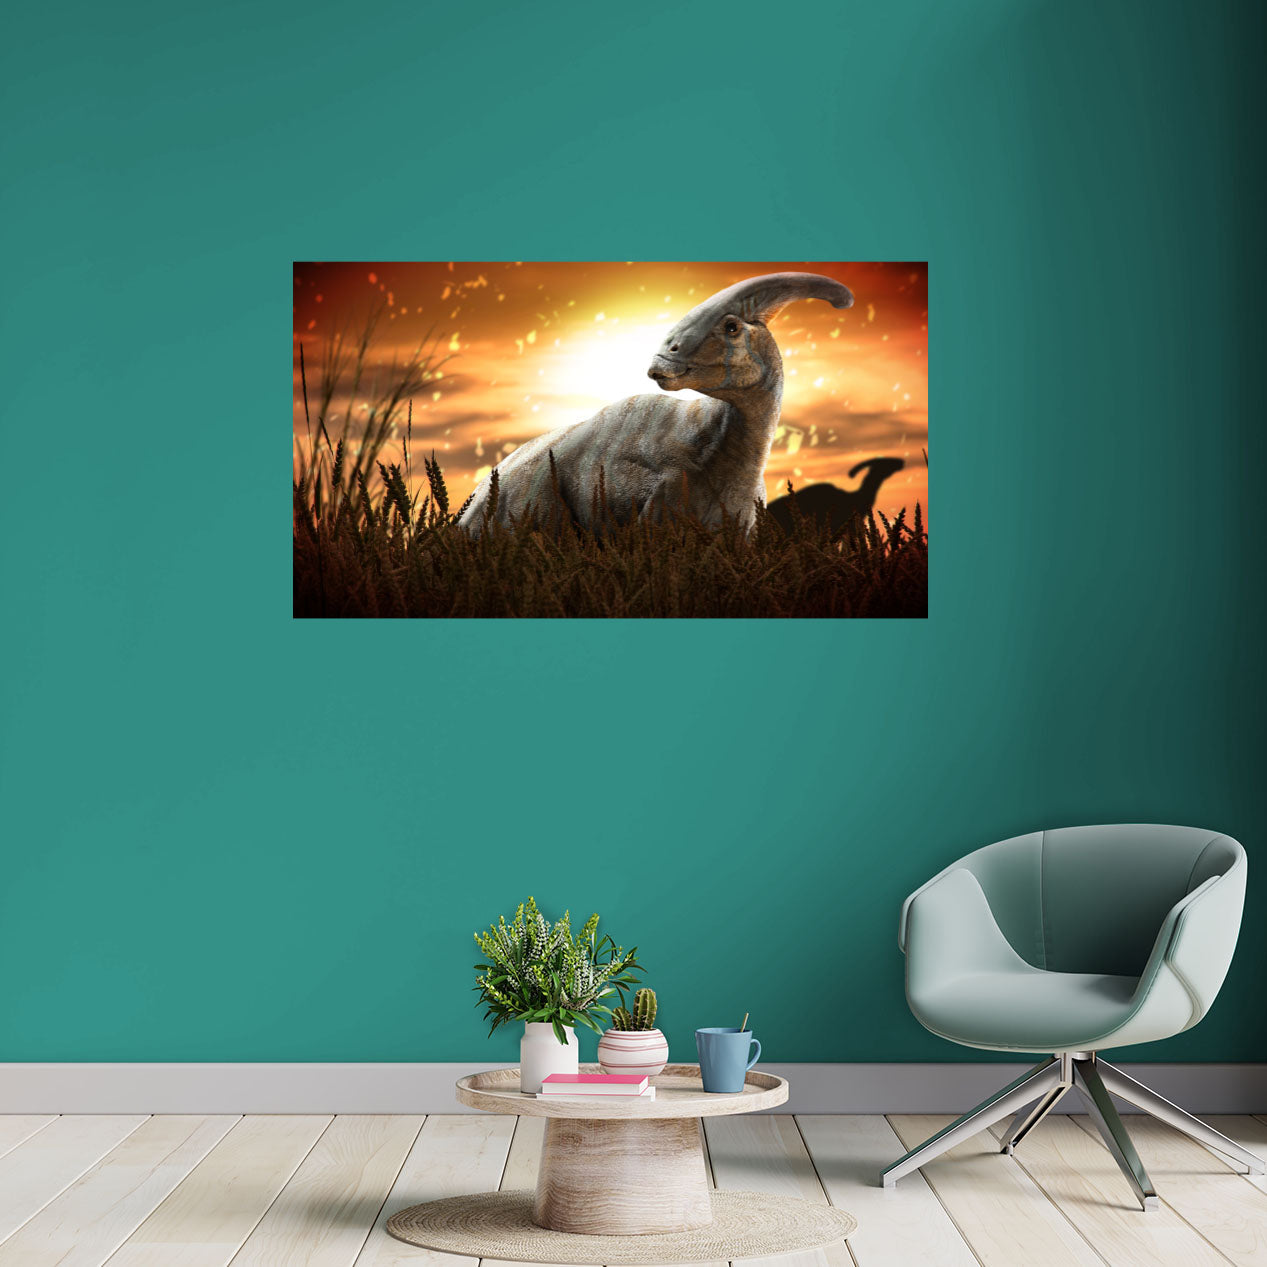 Jurassic World Dominion: Parasaurolophus Sunset Poster - Officially Licensed NBC Universal Removable Adhesive Decal